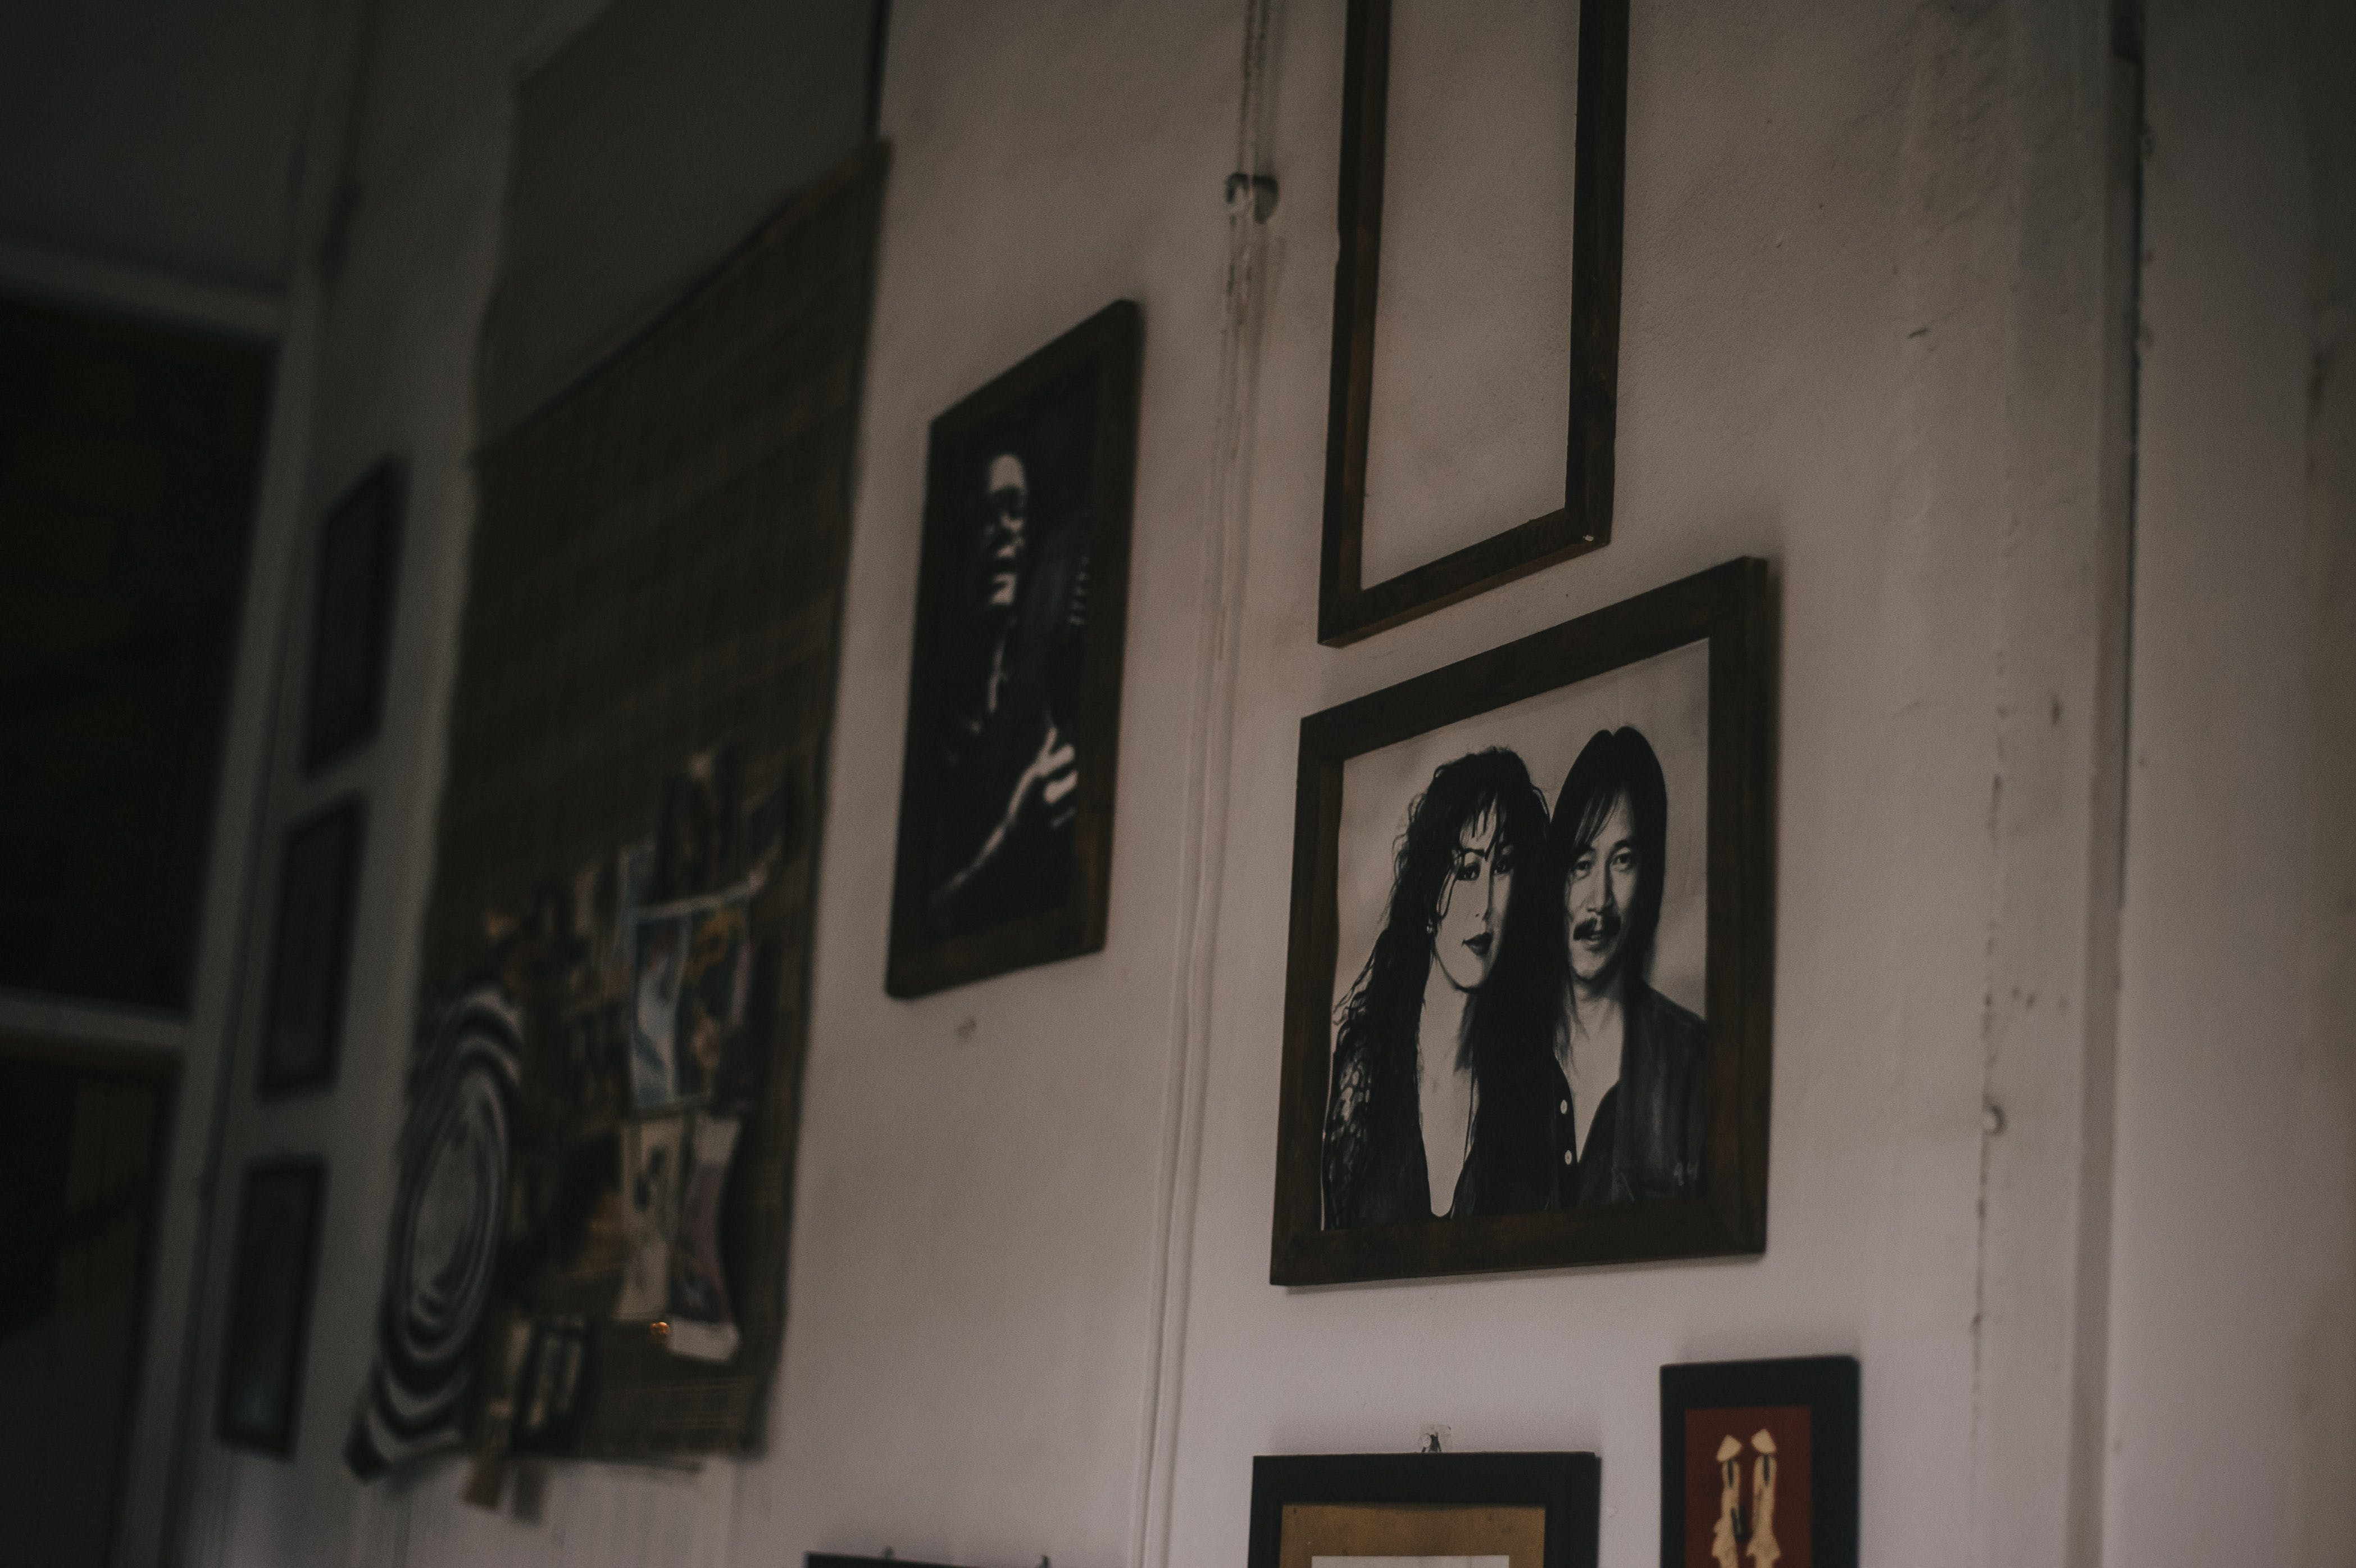 Framed portraits hung on the wall | Source: Pexels